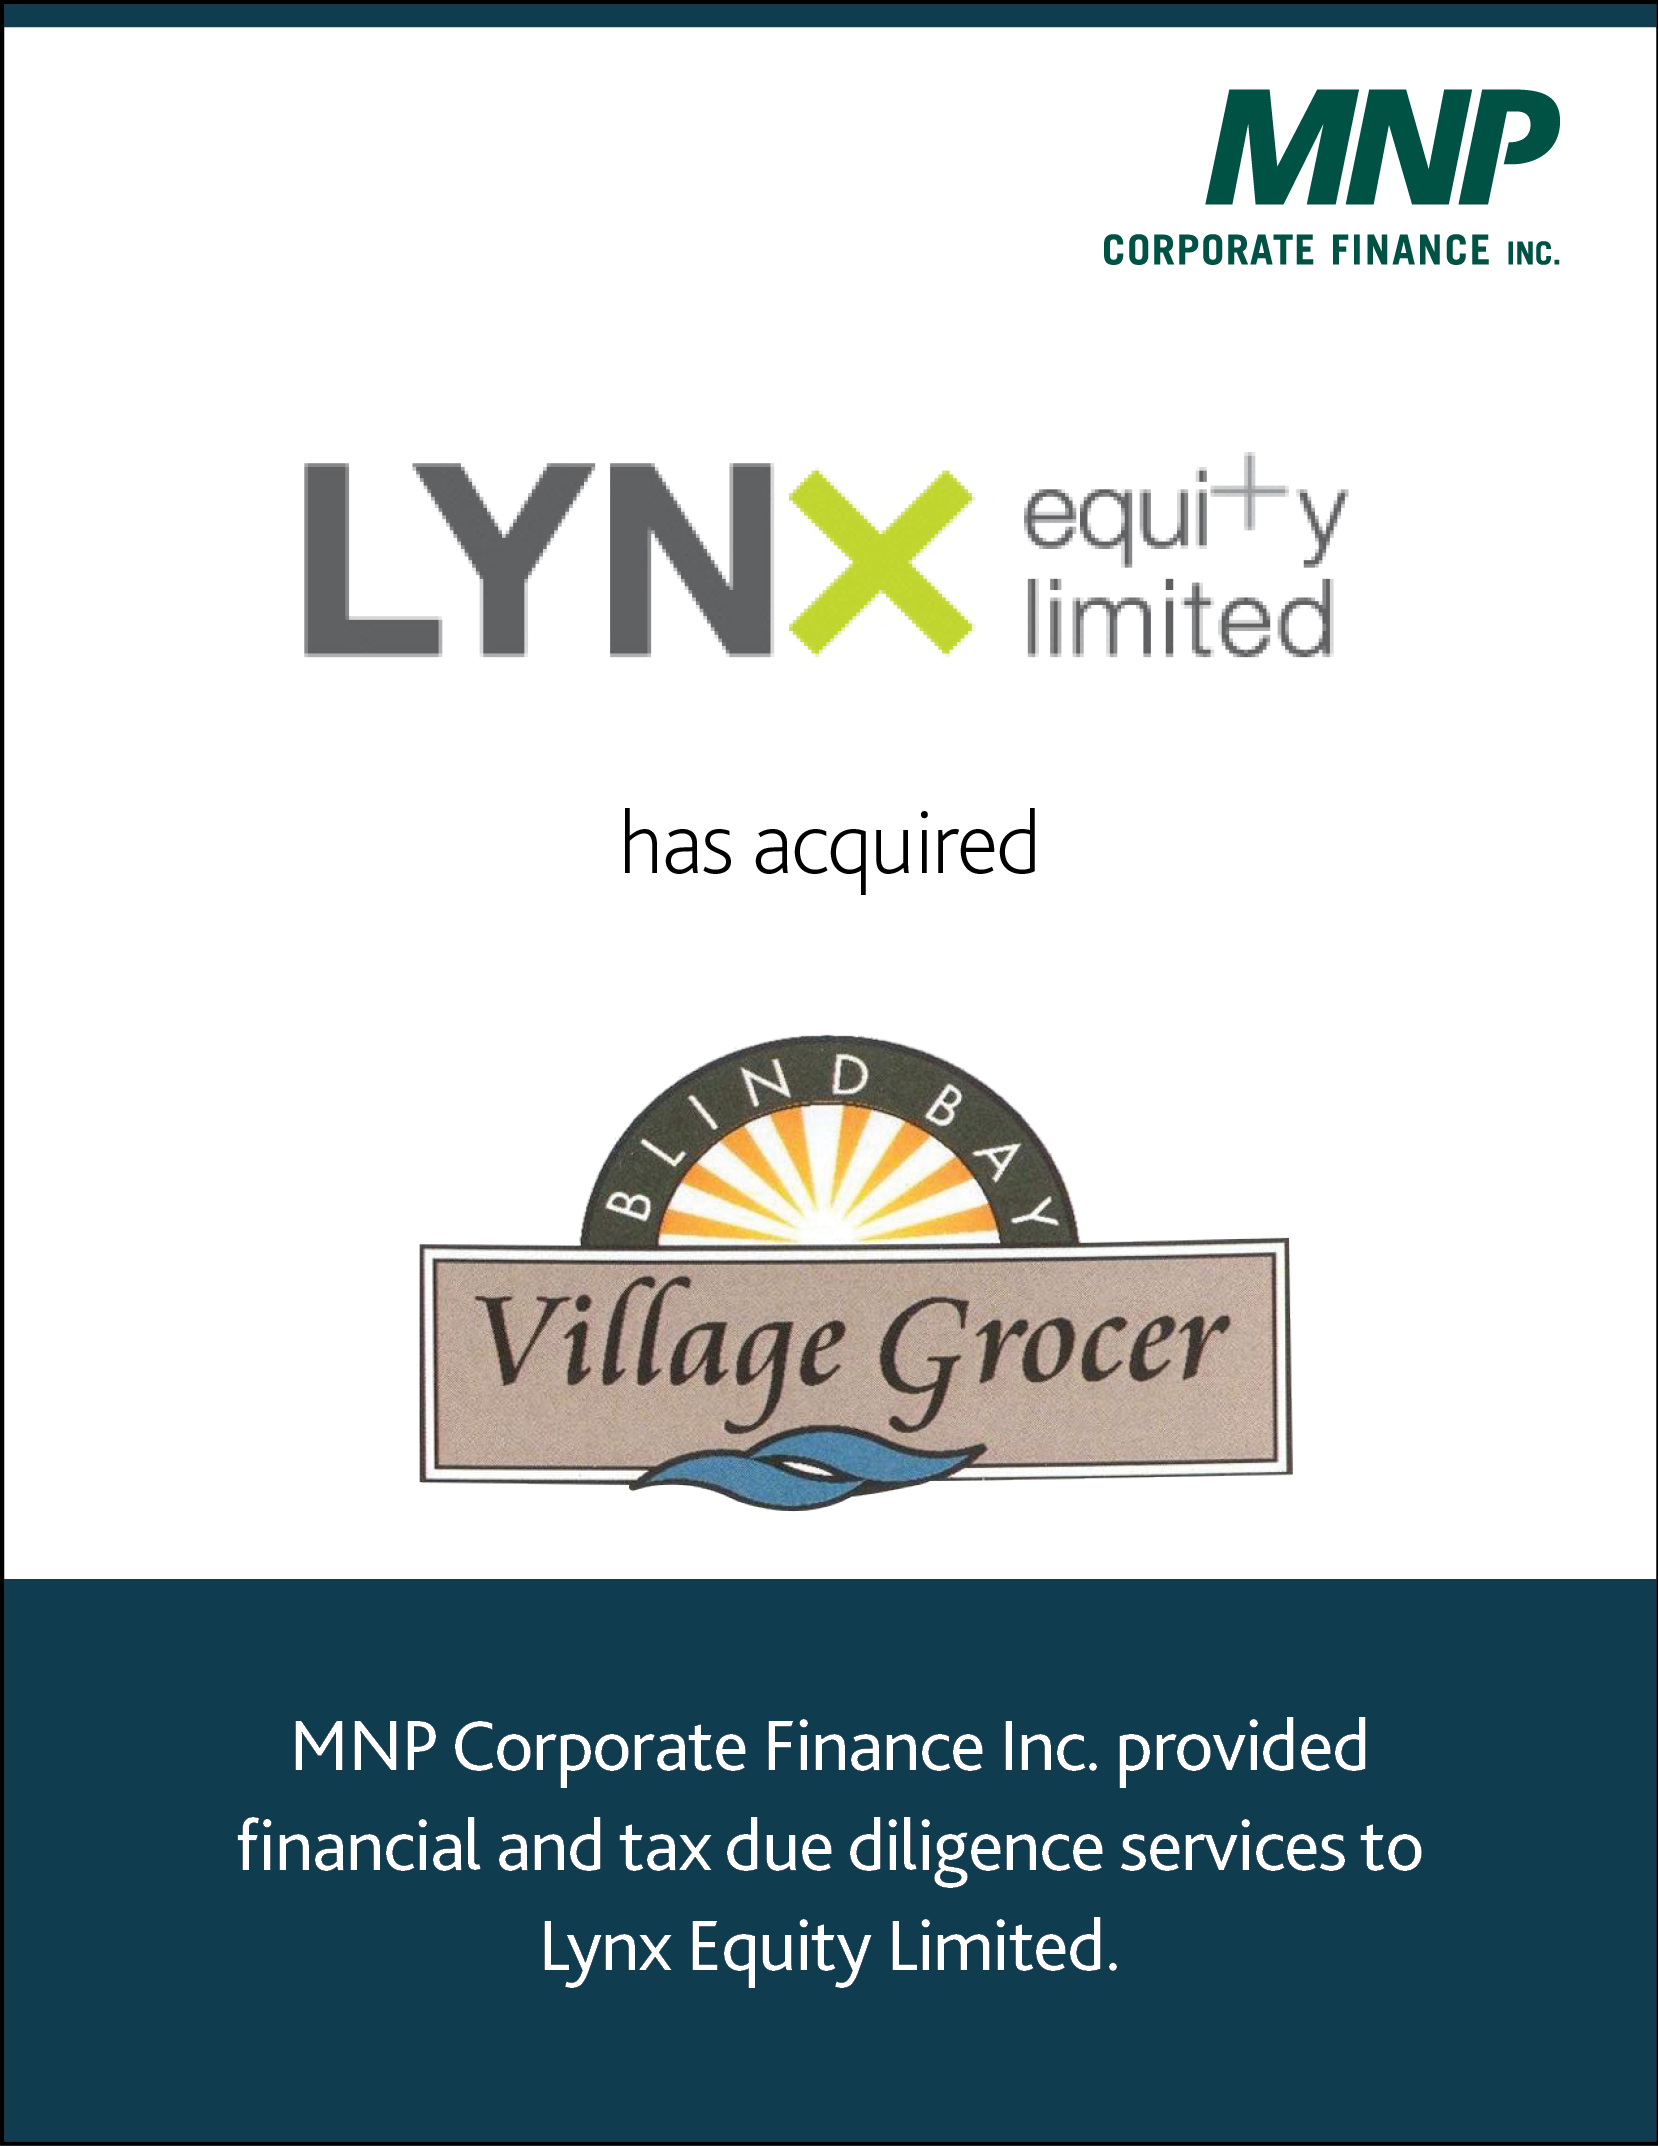 Lynx Equity Limited has acquired capital to Blind Bay Village Grocers Ltd.